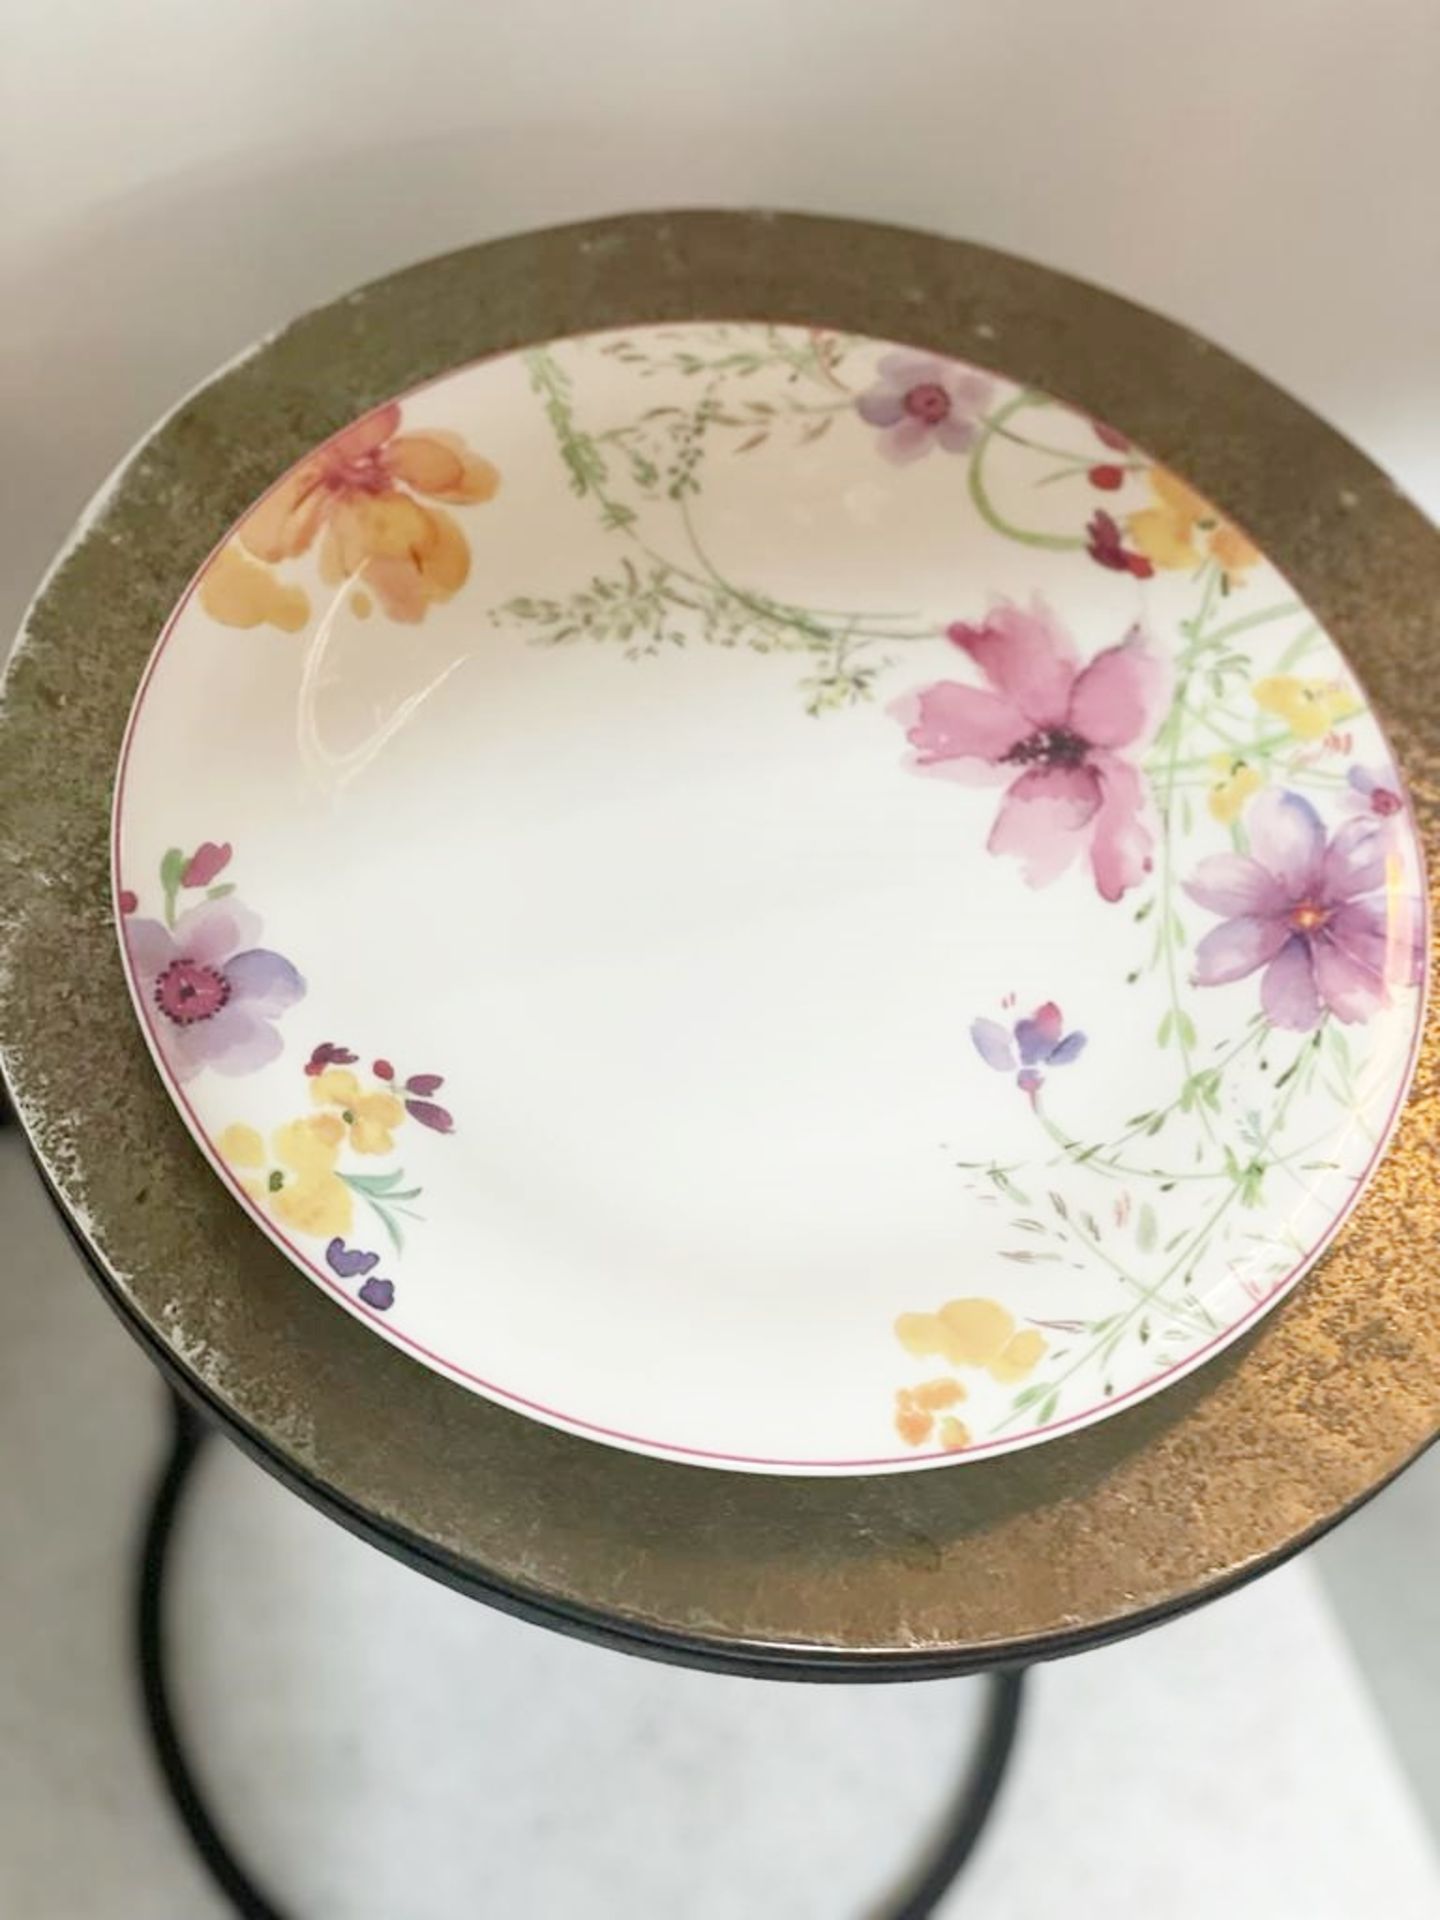 17 x Assorted Of Villeroy And Boch Floral Plates - Ref: AUR157  - NO VAT ON THE HAMMER - CL652 - - Image 2 of 5